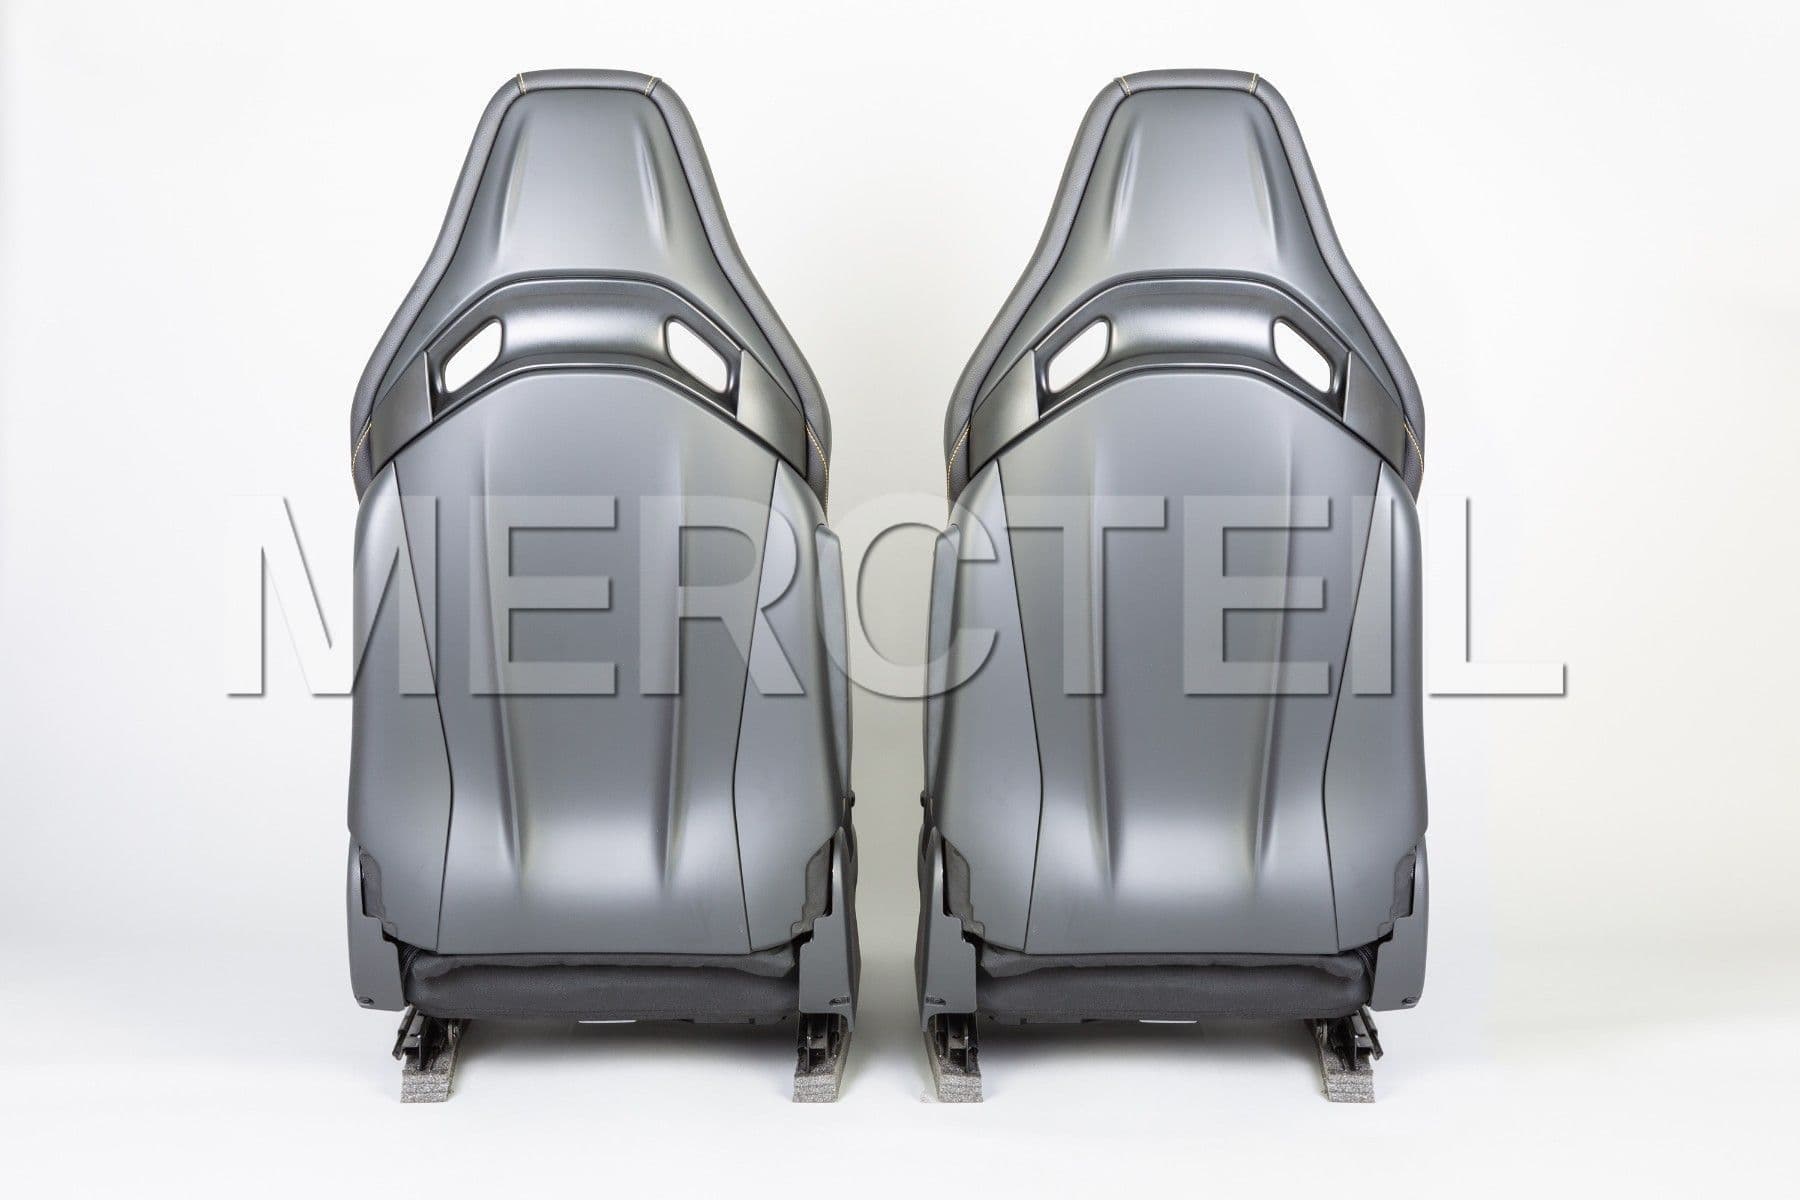 AMG Performance Seats Black & Yellow Genuine Mercedes AMG for CLA-Class C117